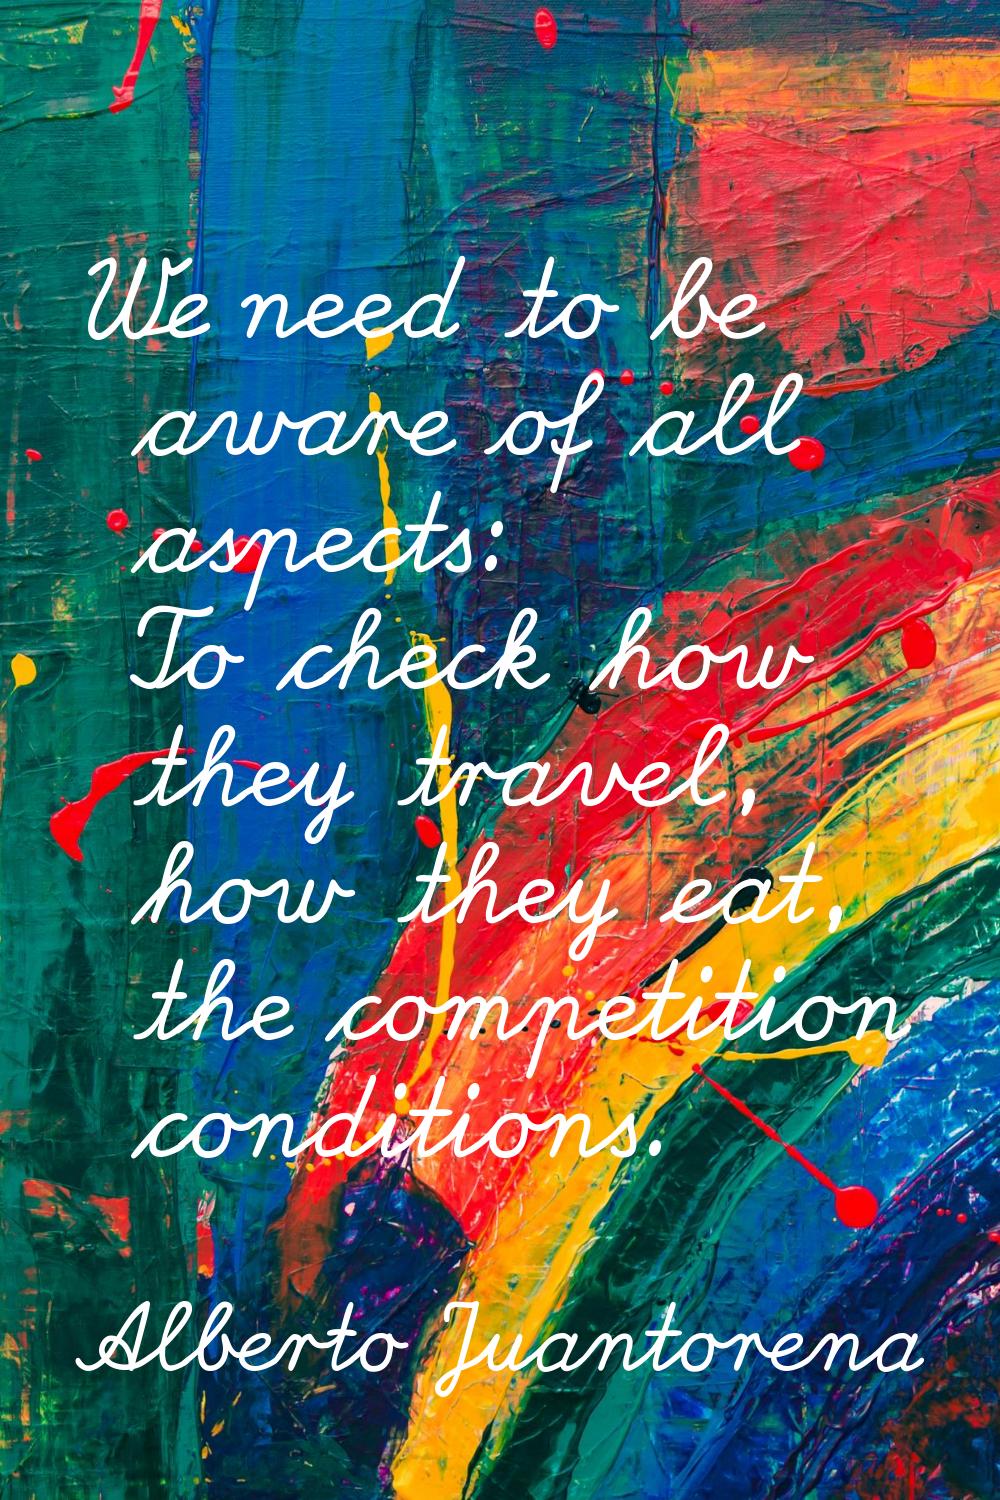 We need to be aware of all aspects: To check how they travel, how they eat, the competition conditi